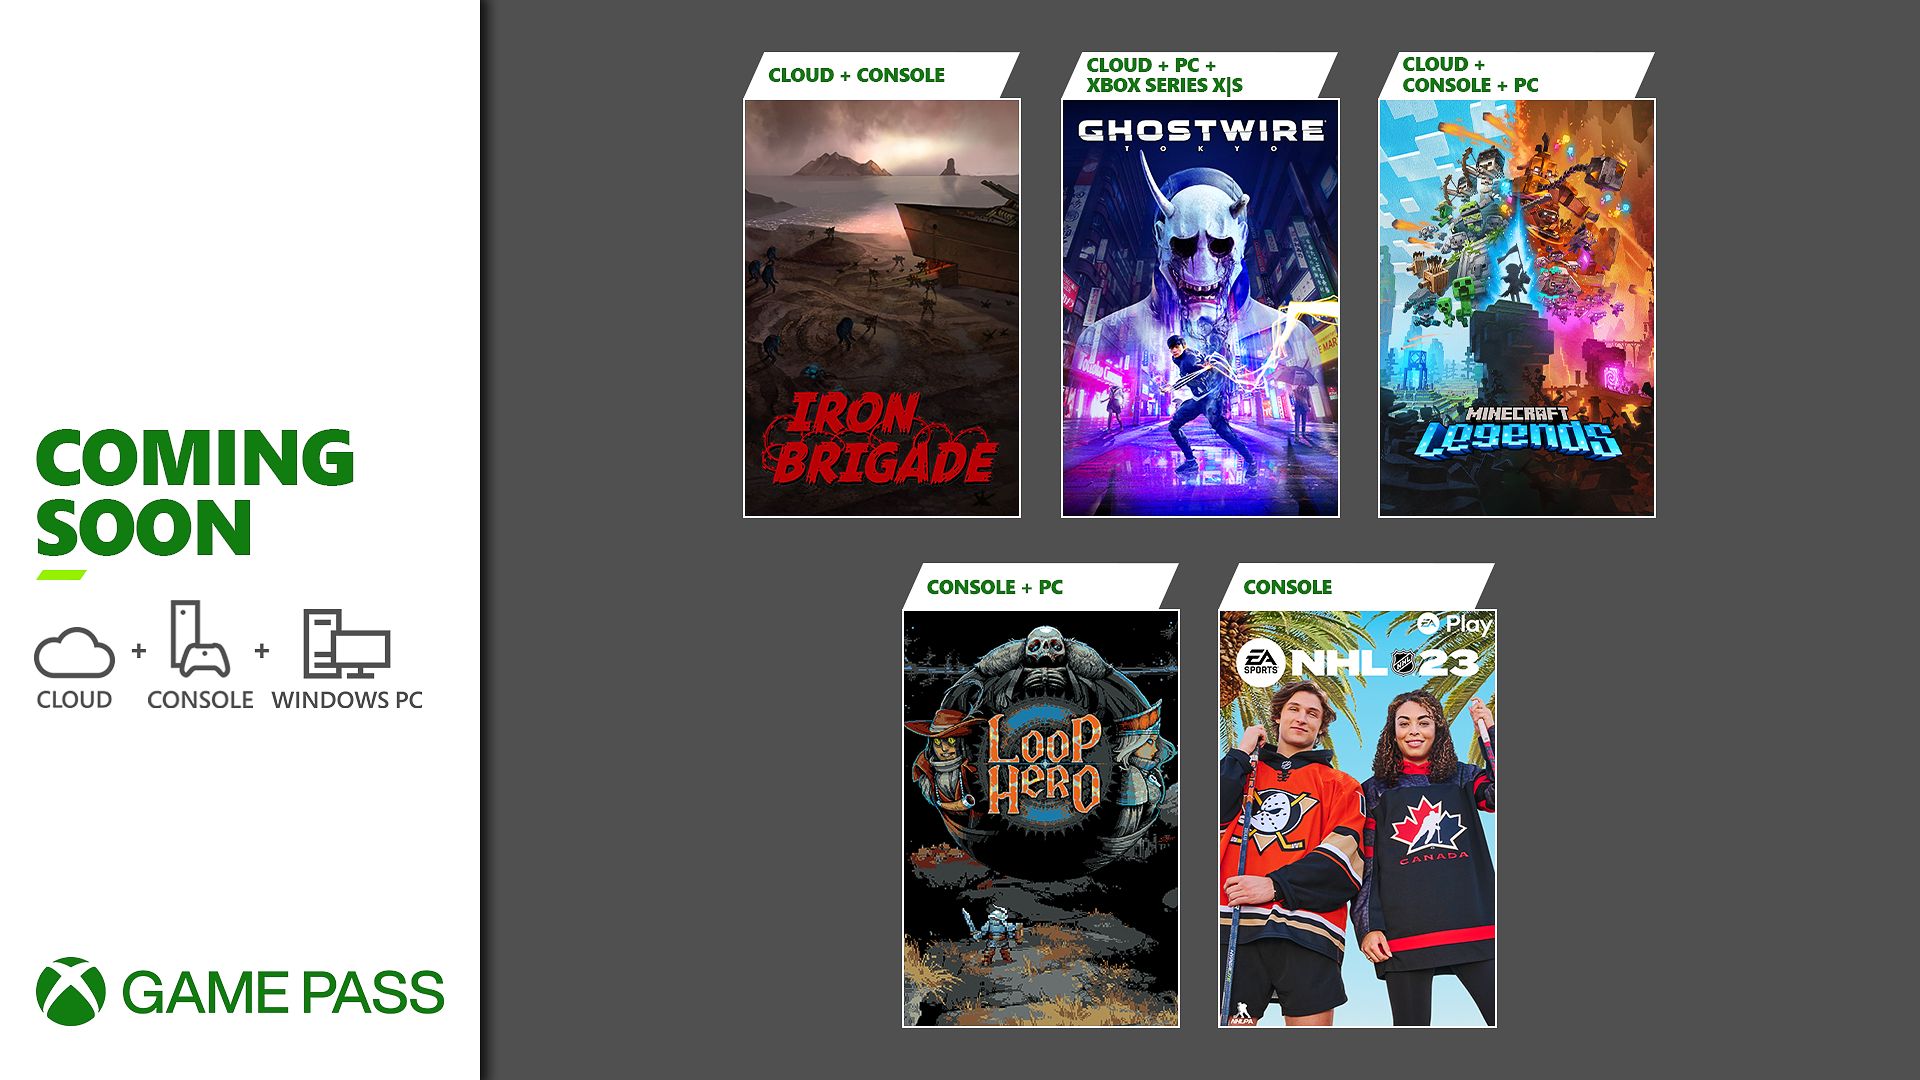 Xbox Game Pass Ultimate Perks Archives - Page 2 of 7 - Xbox Wire